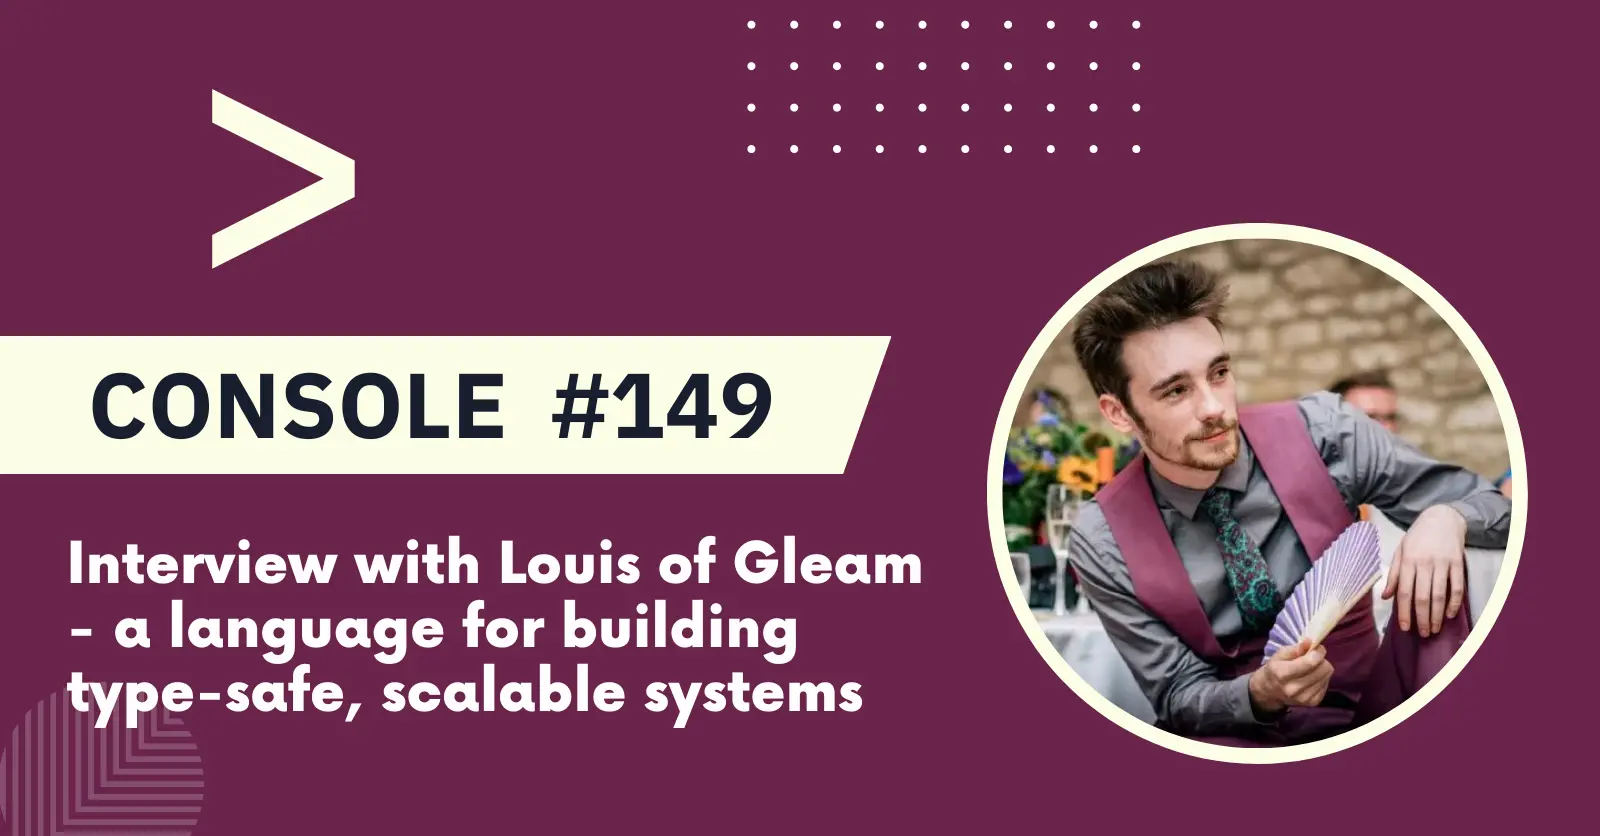 Interview with Louis of Gleam - a language for building type-safe, scalable systems